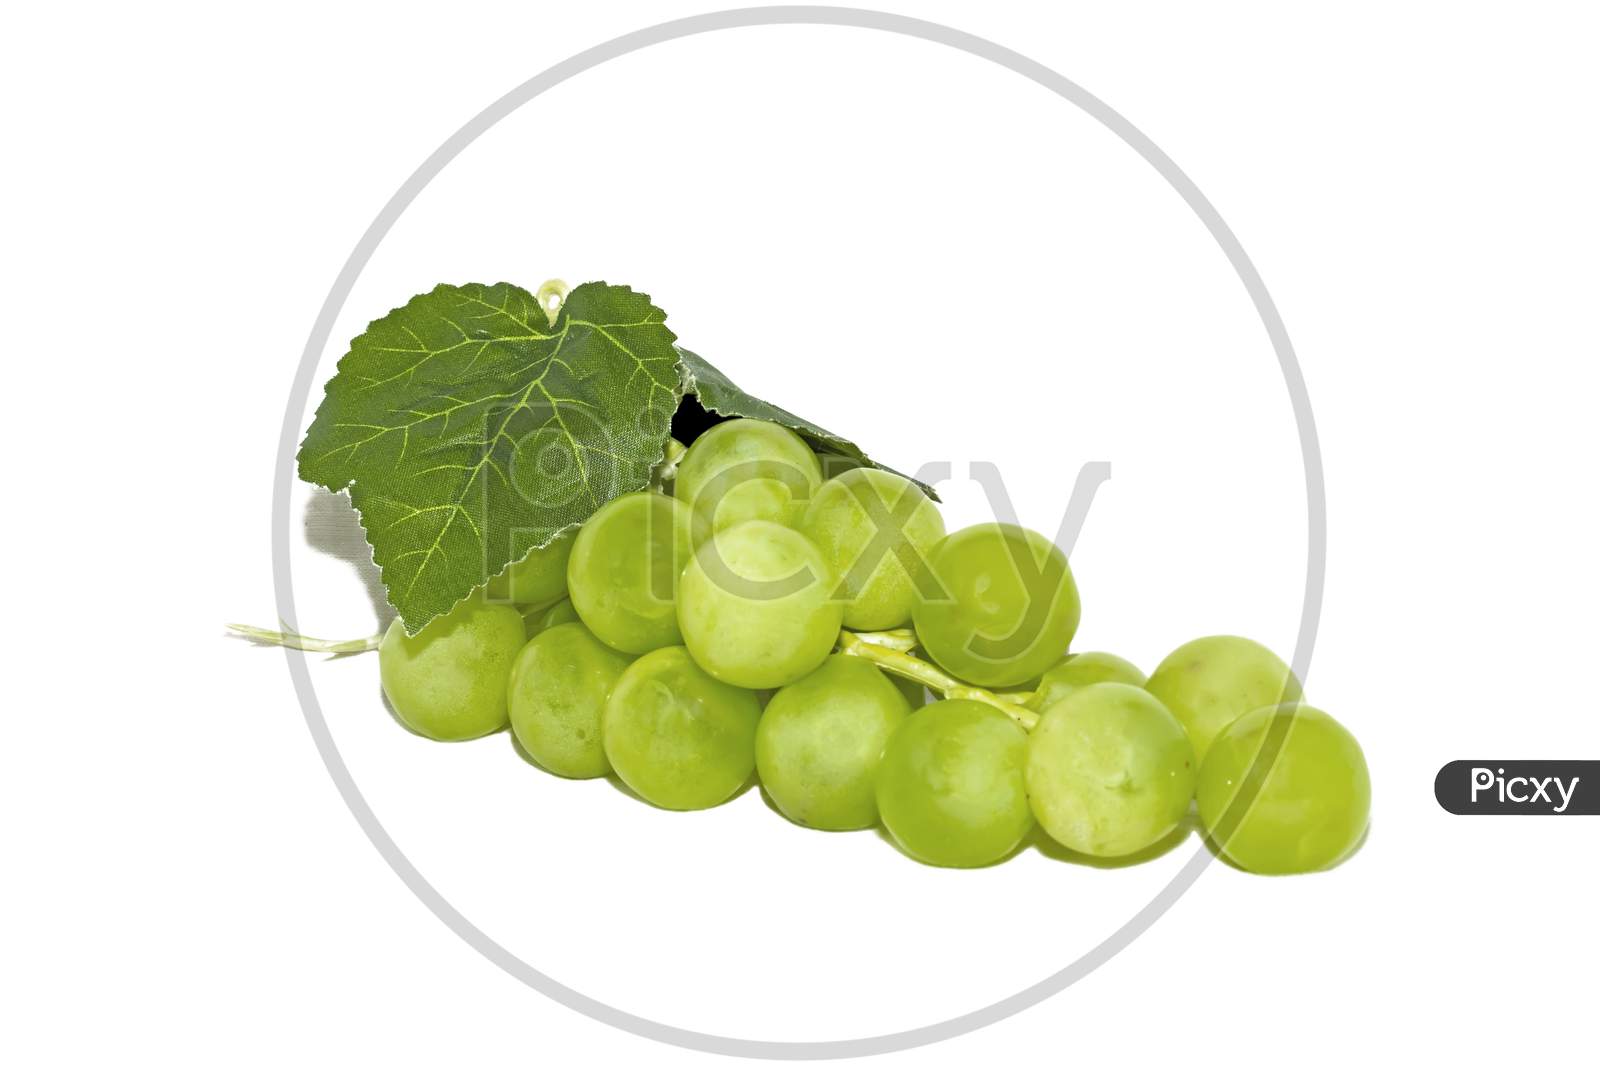 Bunch Of Green Seedless Grape Isolated On White Background.